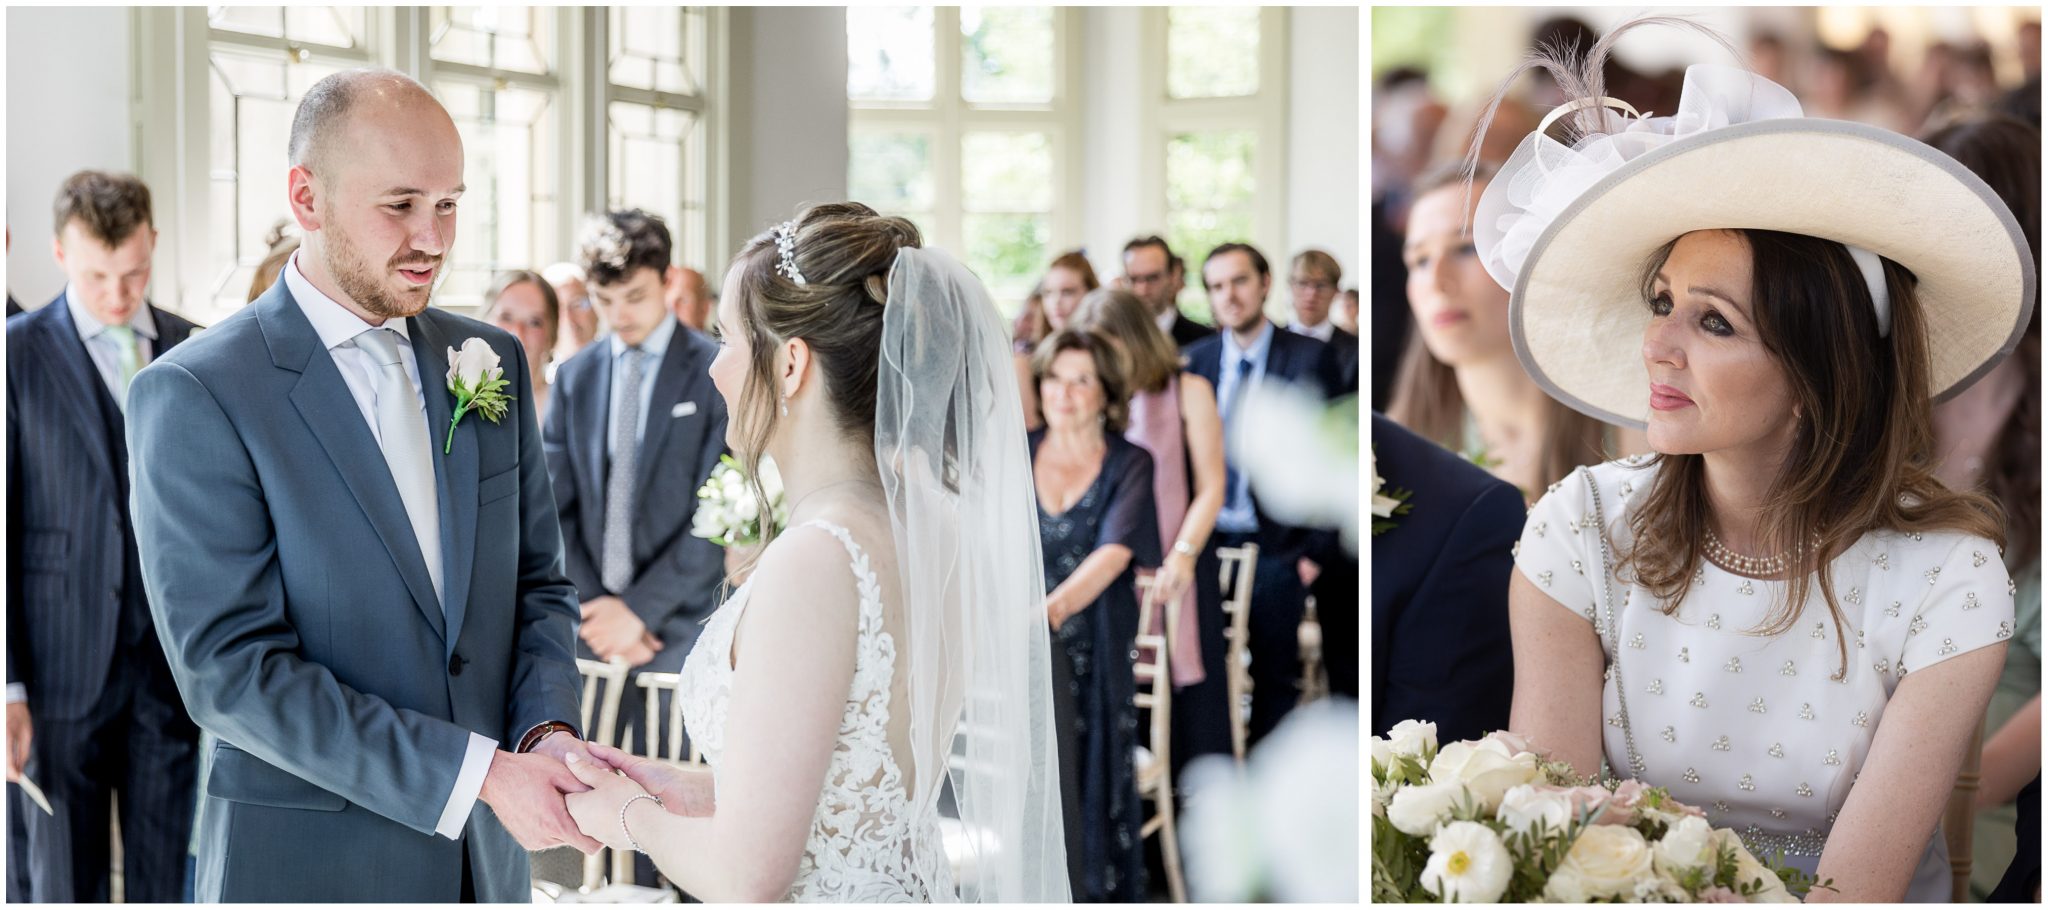 Bride and groom face each other to make their vows as bride's mother watches on